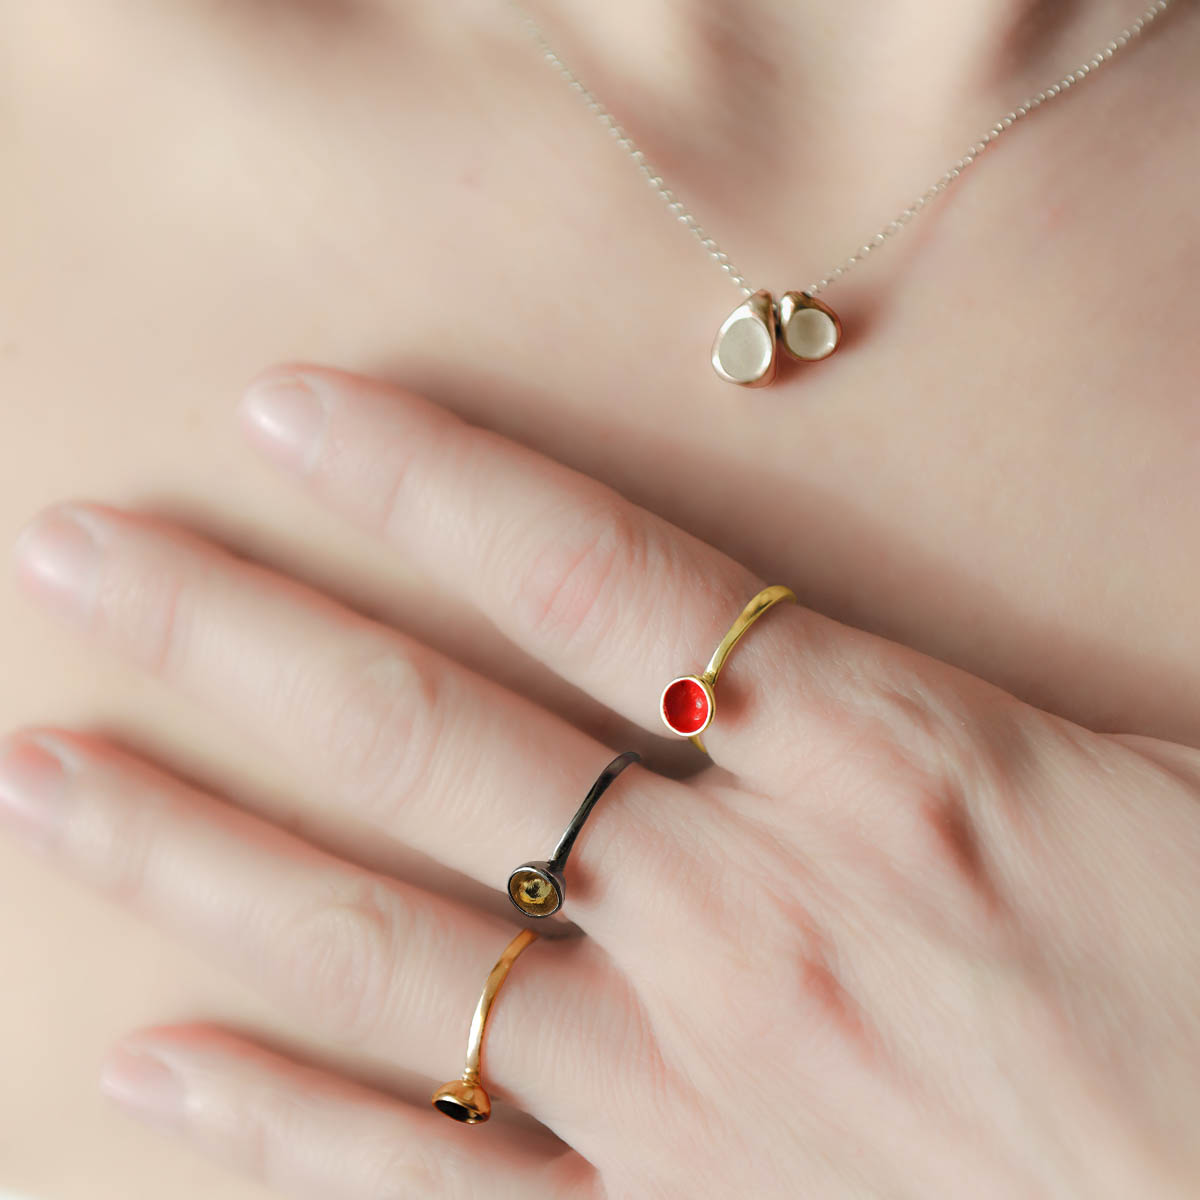 The Dots rings are available in silver, gold, rhodium and colored with enamel paint. Design and handmade for Bead A Boo jewelry by Katerina Glinou.